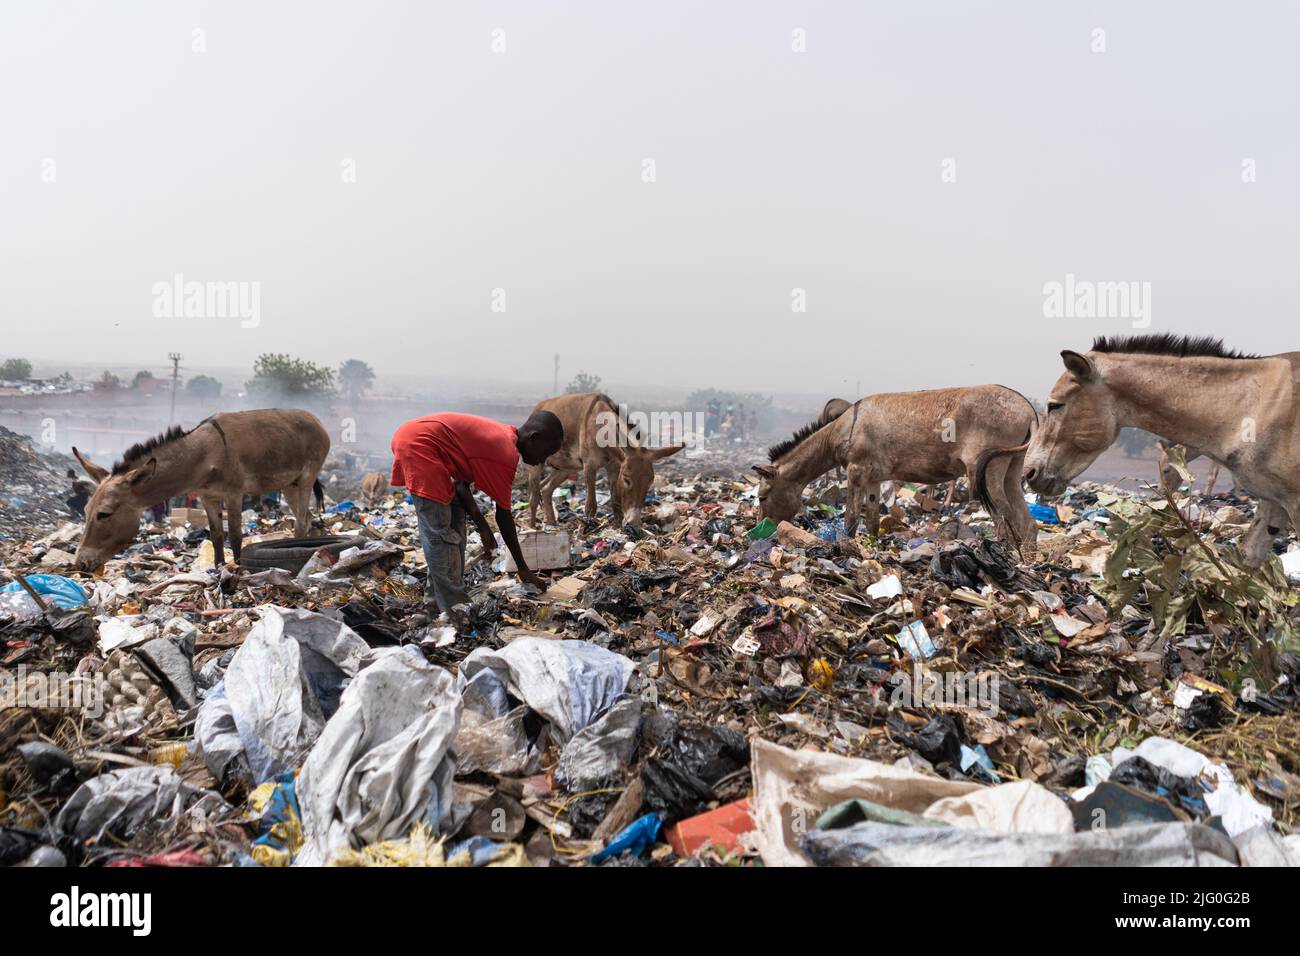 A smoking suburban landfill in West Africa, with donkeys and a street child searching for recyclable substances; pollution concept Stock Photo